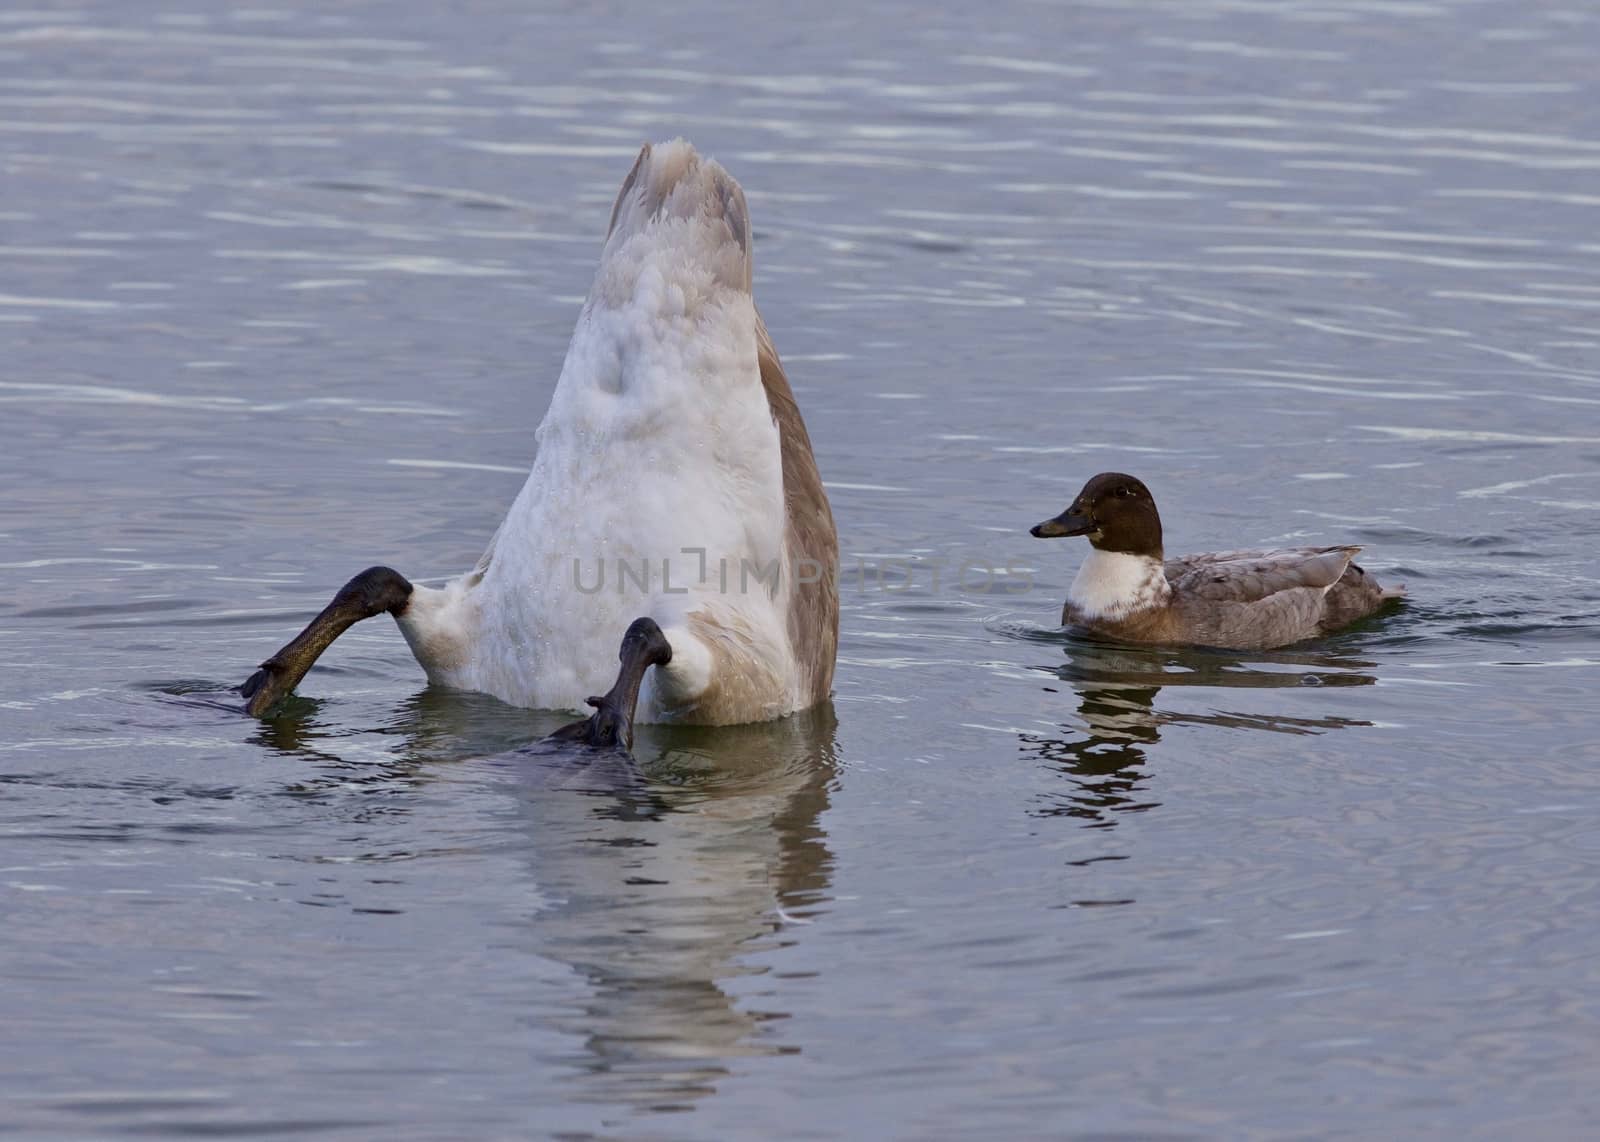 Isolated photo of a swan upside-down and a crazy duck